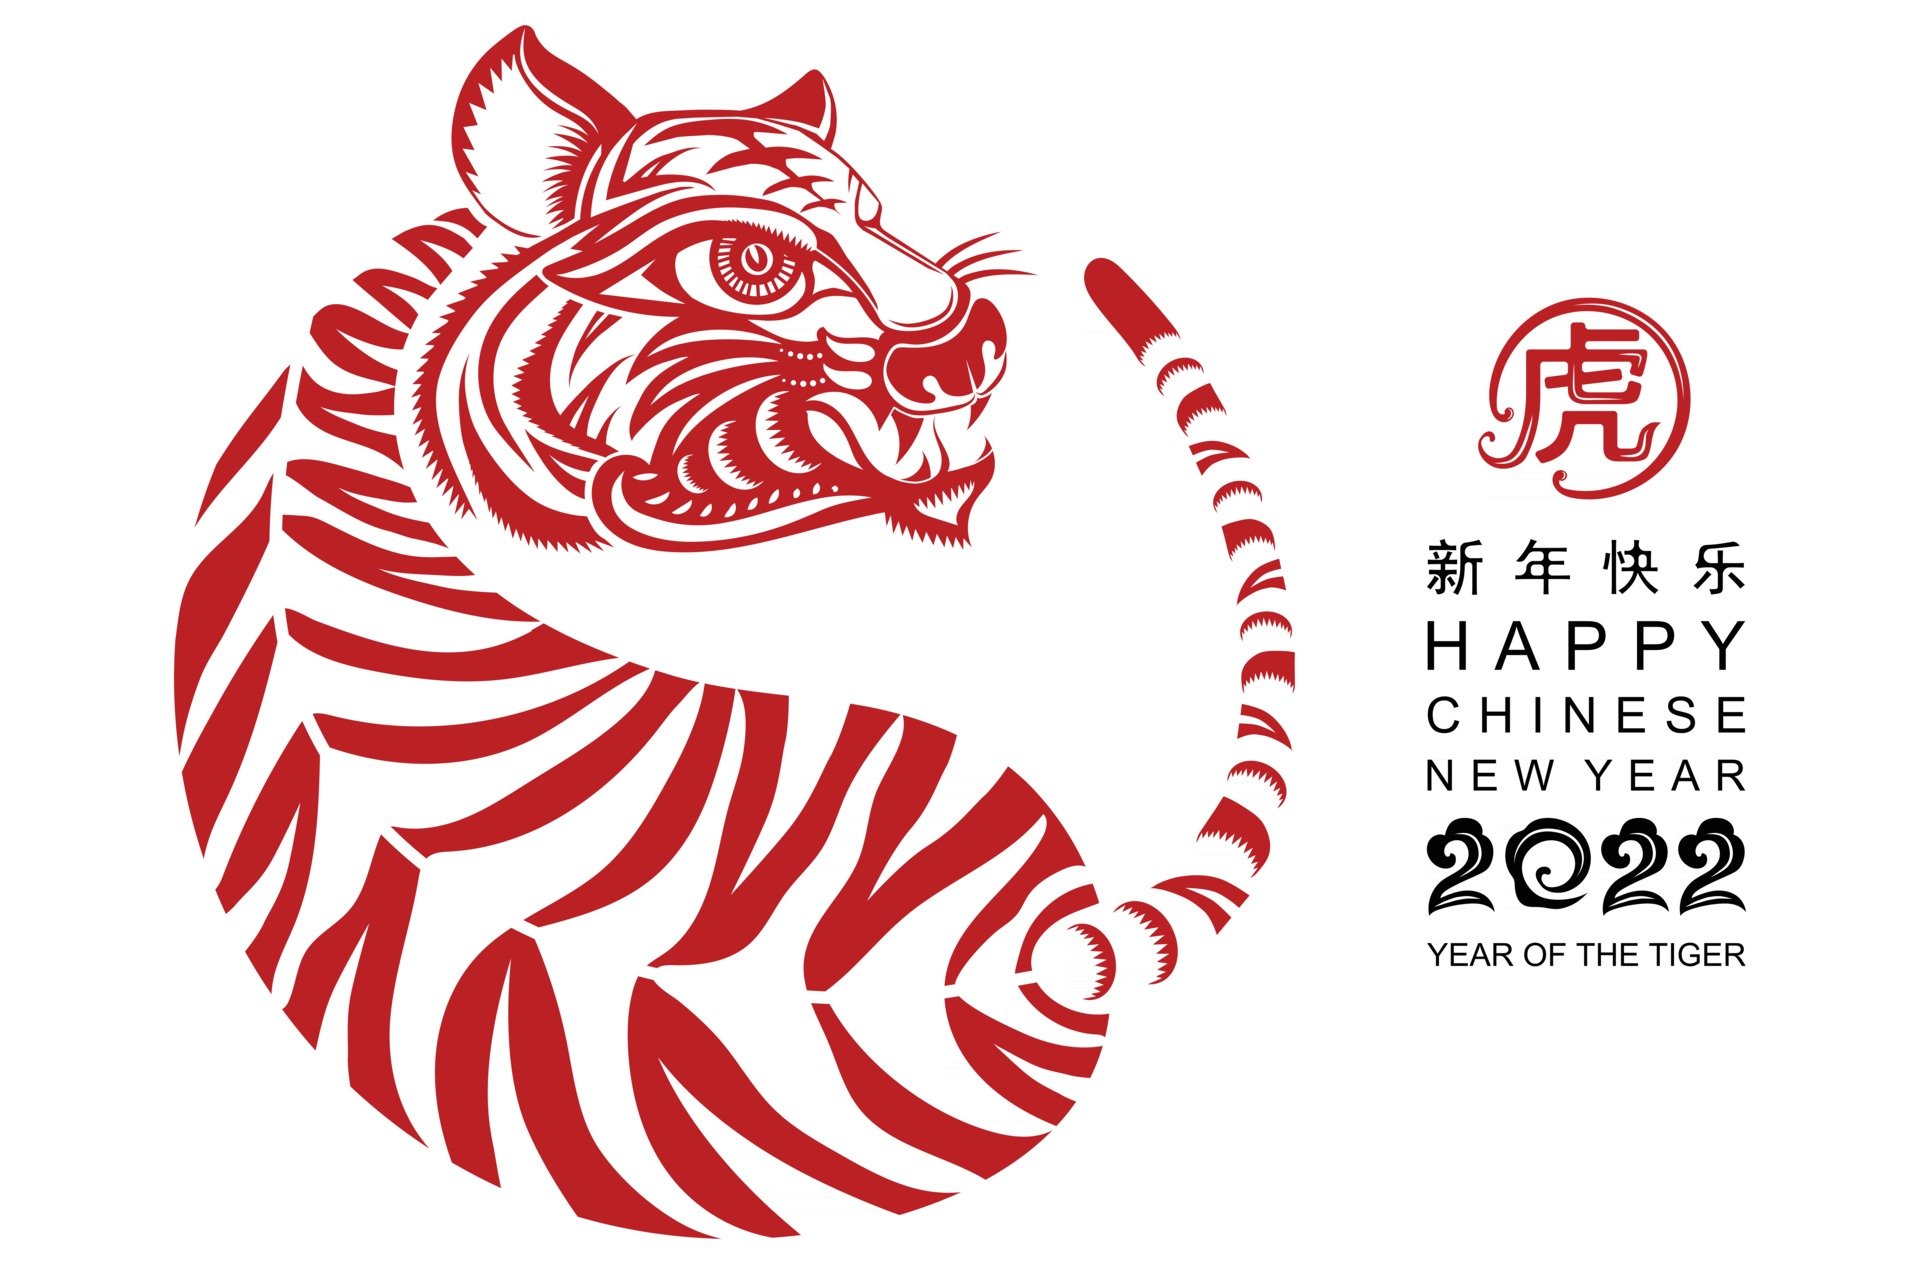 Lunar New Year 2022: Welcoming the Year of the Tiger